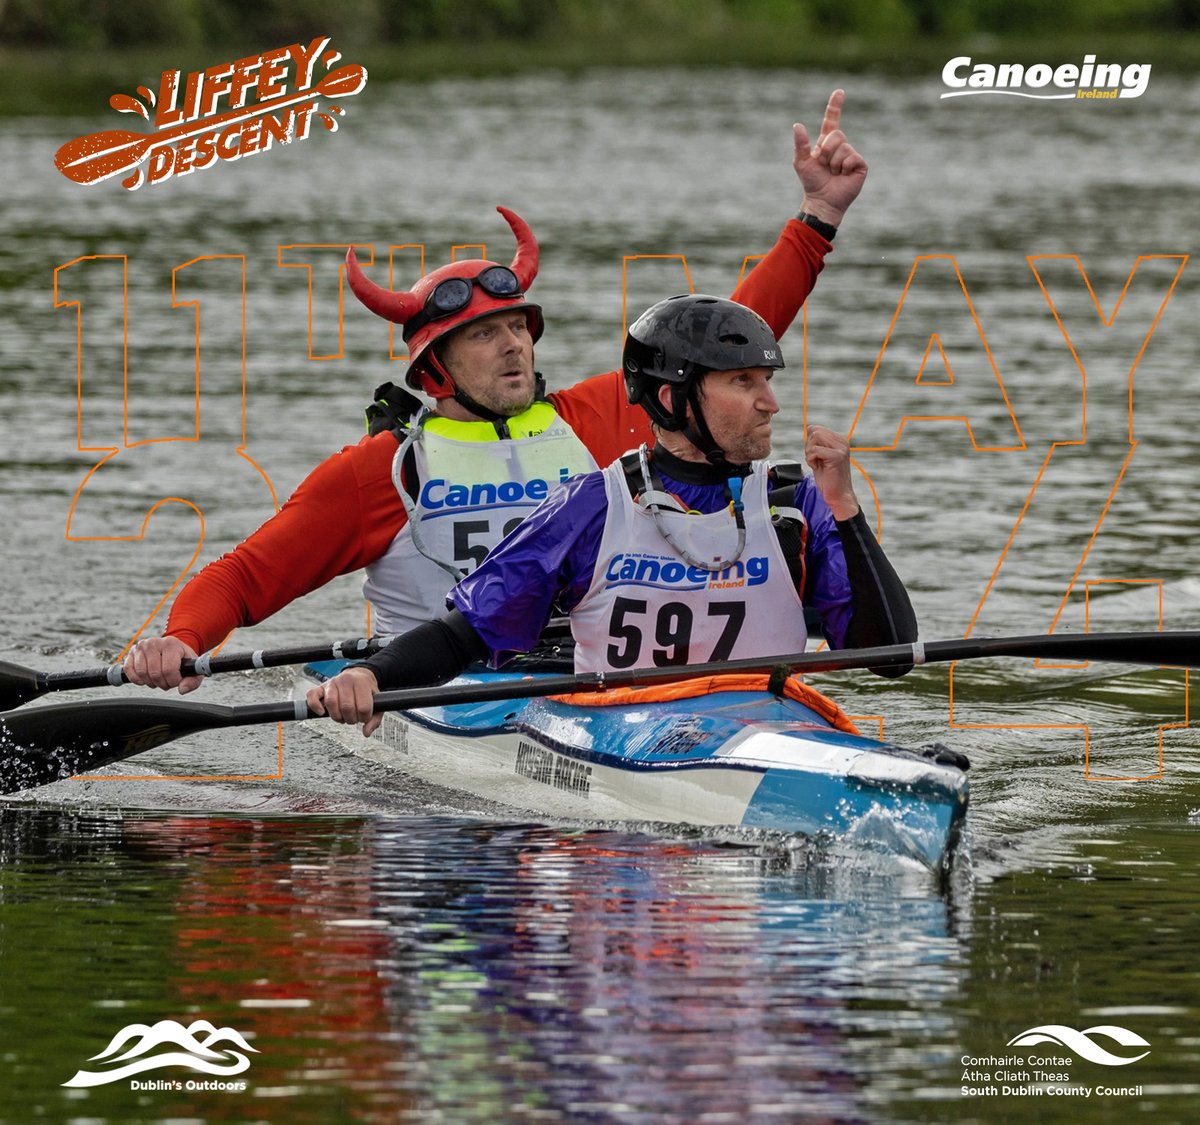 Just over a week to go!! 🏁 We can't wait for the Liffey Descent start line on Sat 11th May!! And even more to look forward to at the finish line 😆 Always a great day to race or just be part of the one of the biggest days of paddling on the calendar 🚣eventmaster.ie/event/R4ZrhL5h…